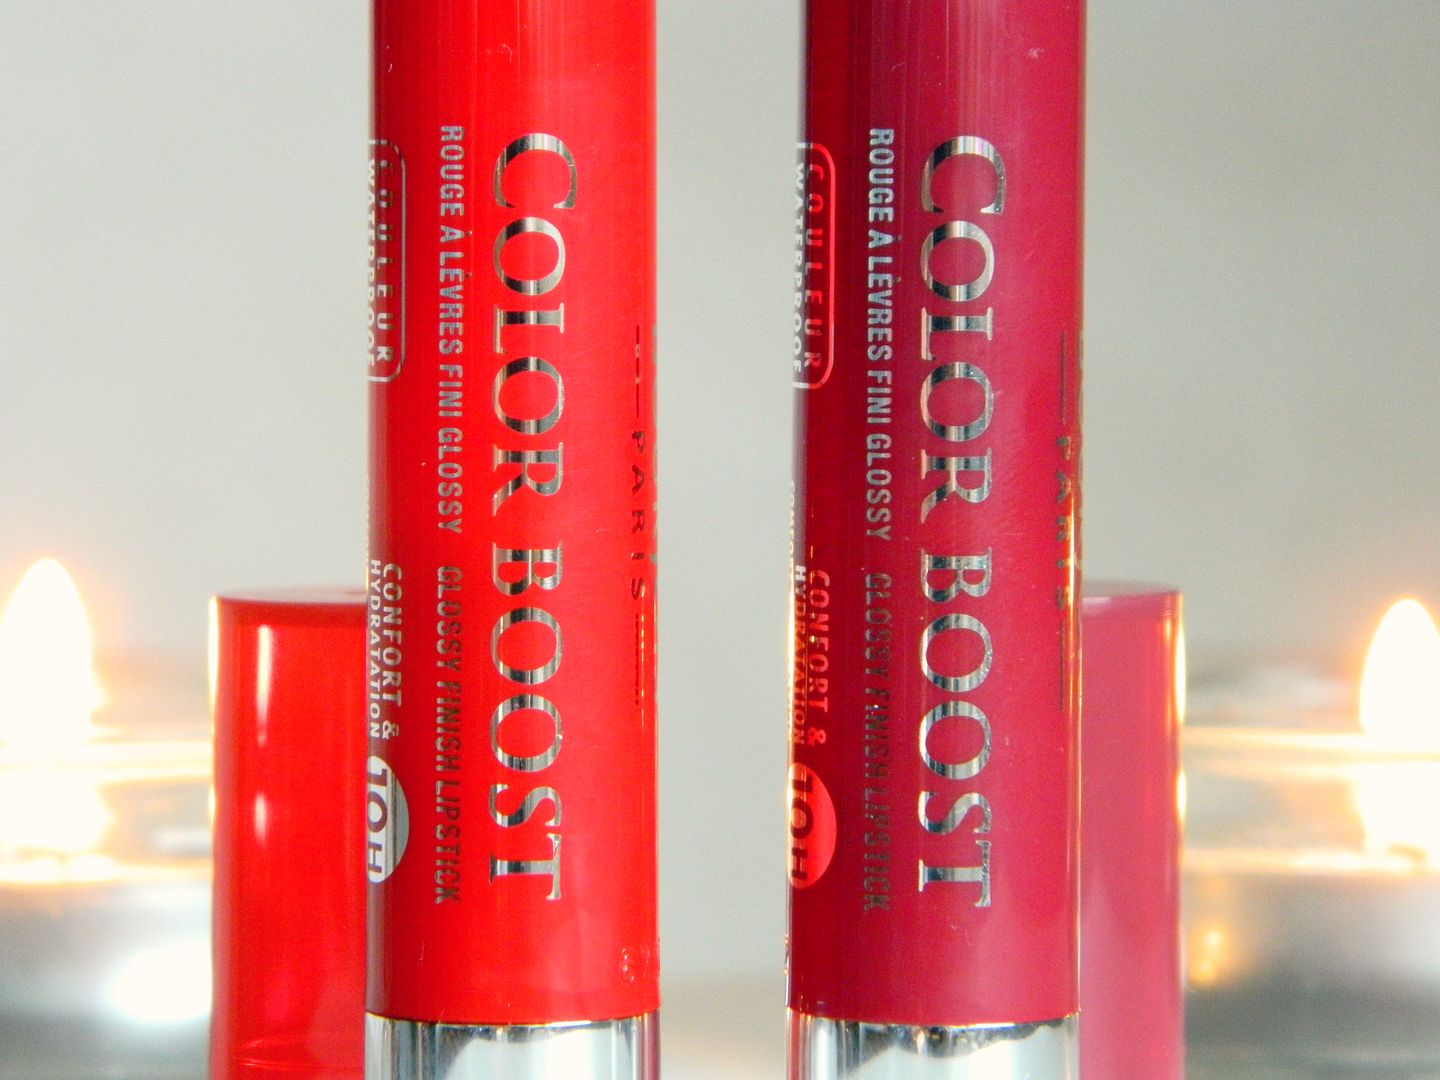 Bourjois Color Boost Lip Crayons Autumn Edition Red Island Plum Russian Bullet Review Belle-amie UK Beauty Fashion Lifestyle Blog